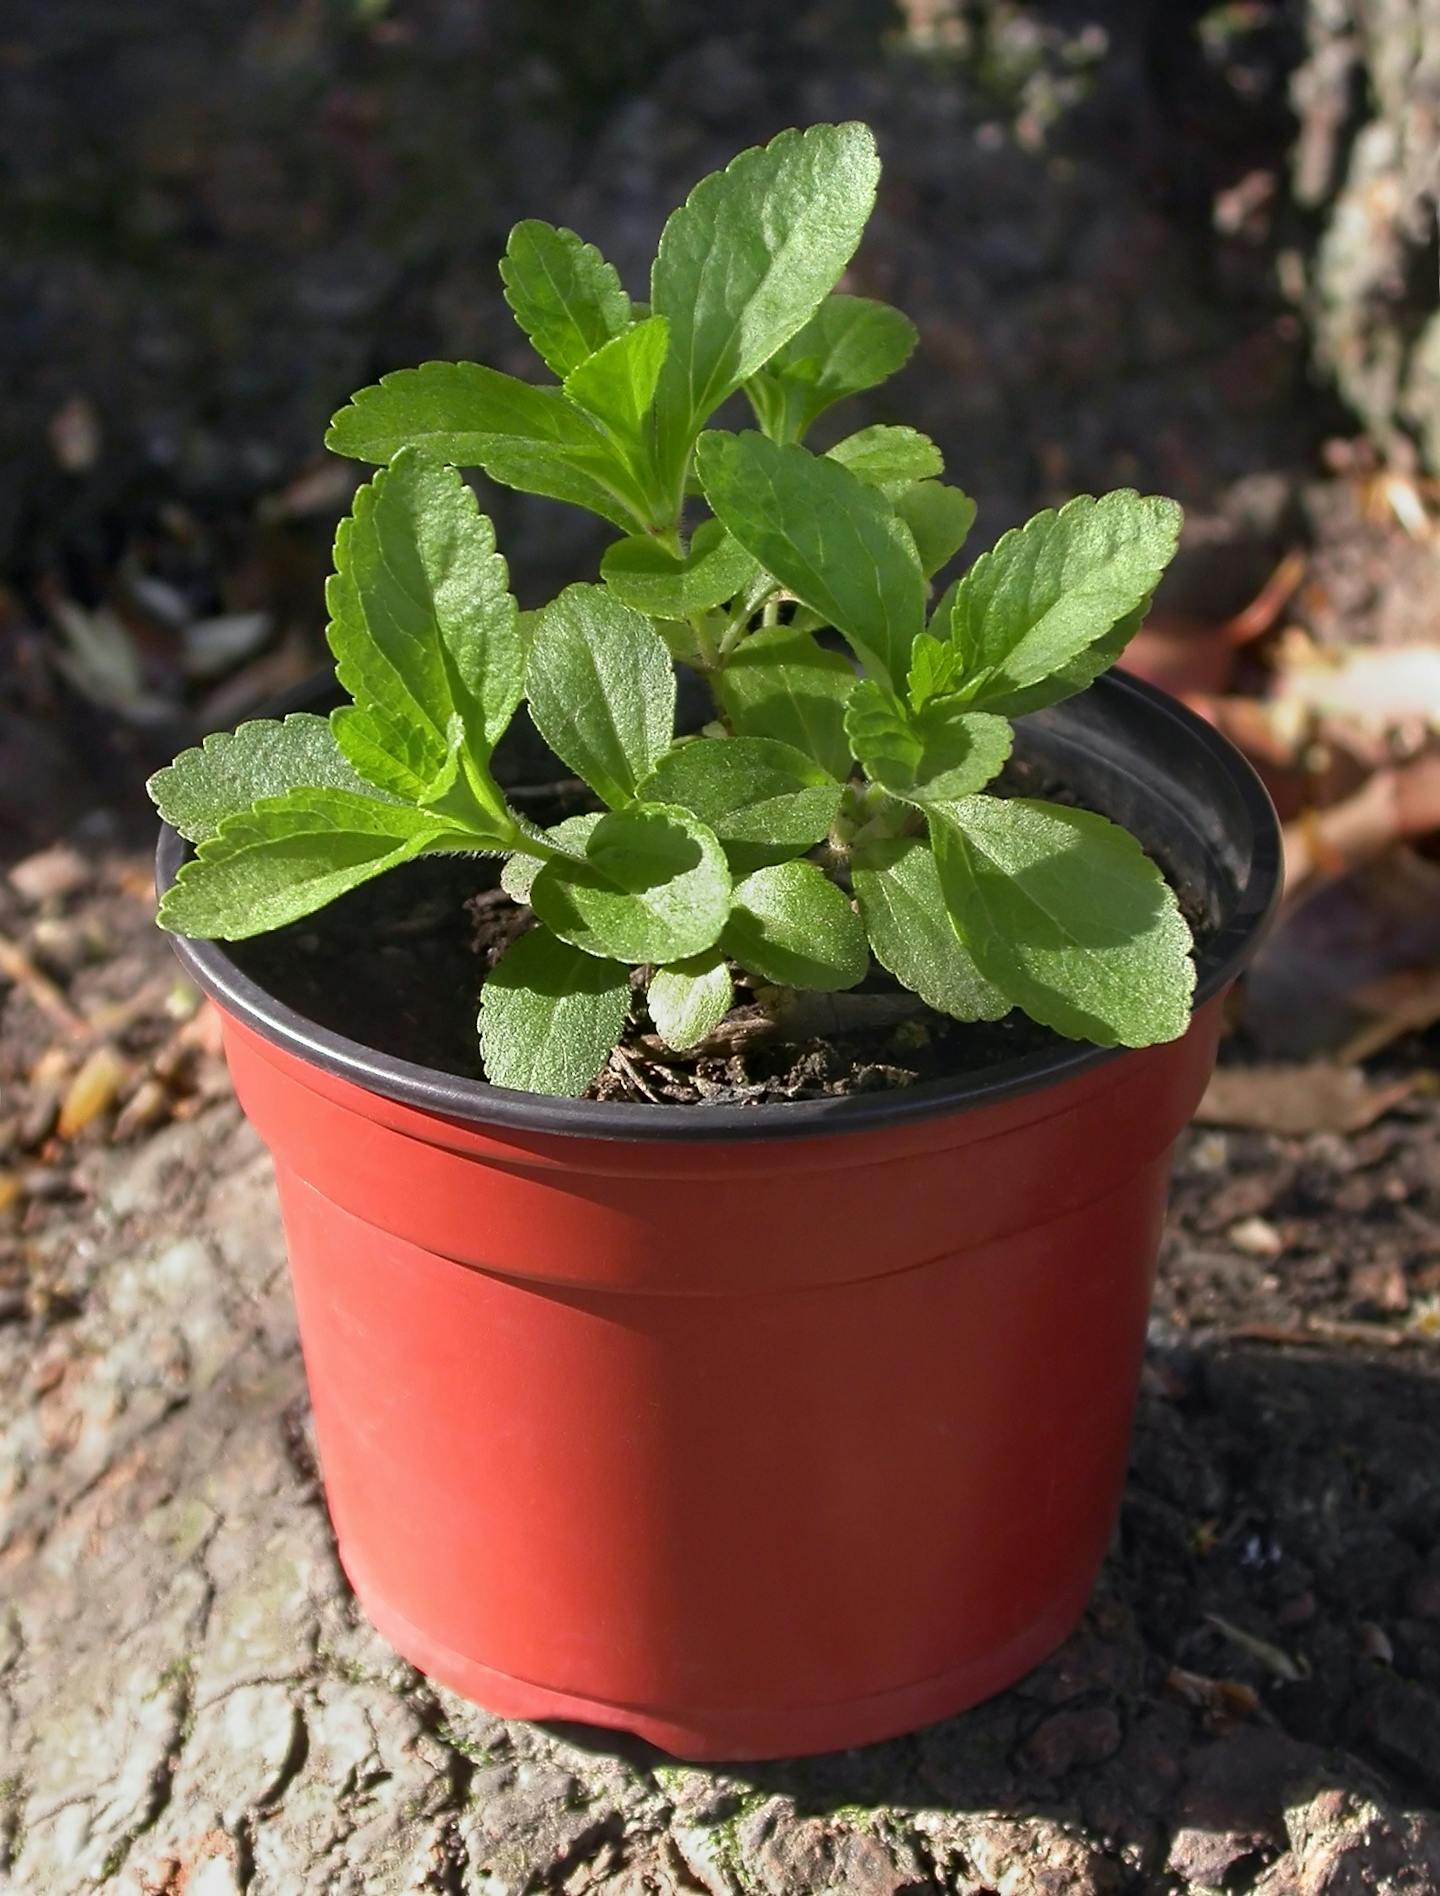 A small green plant in a pot.